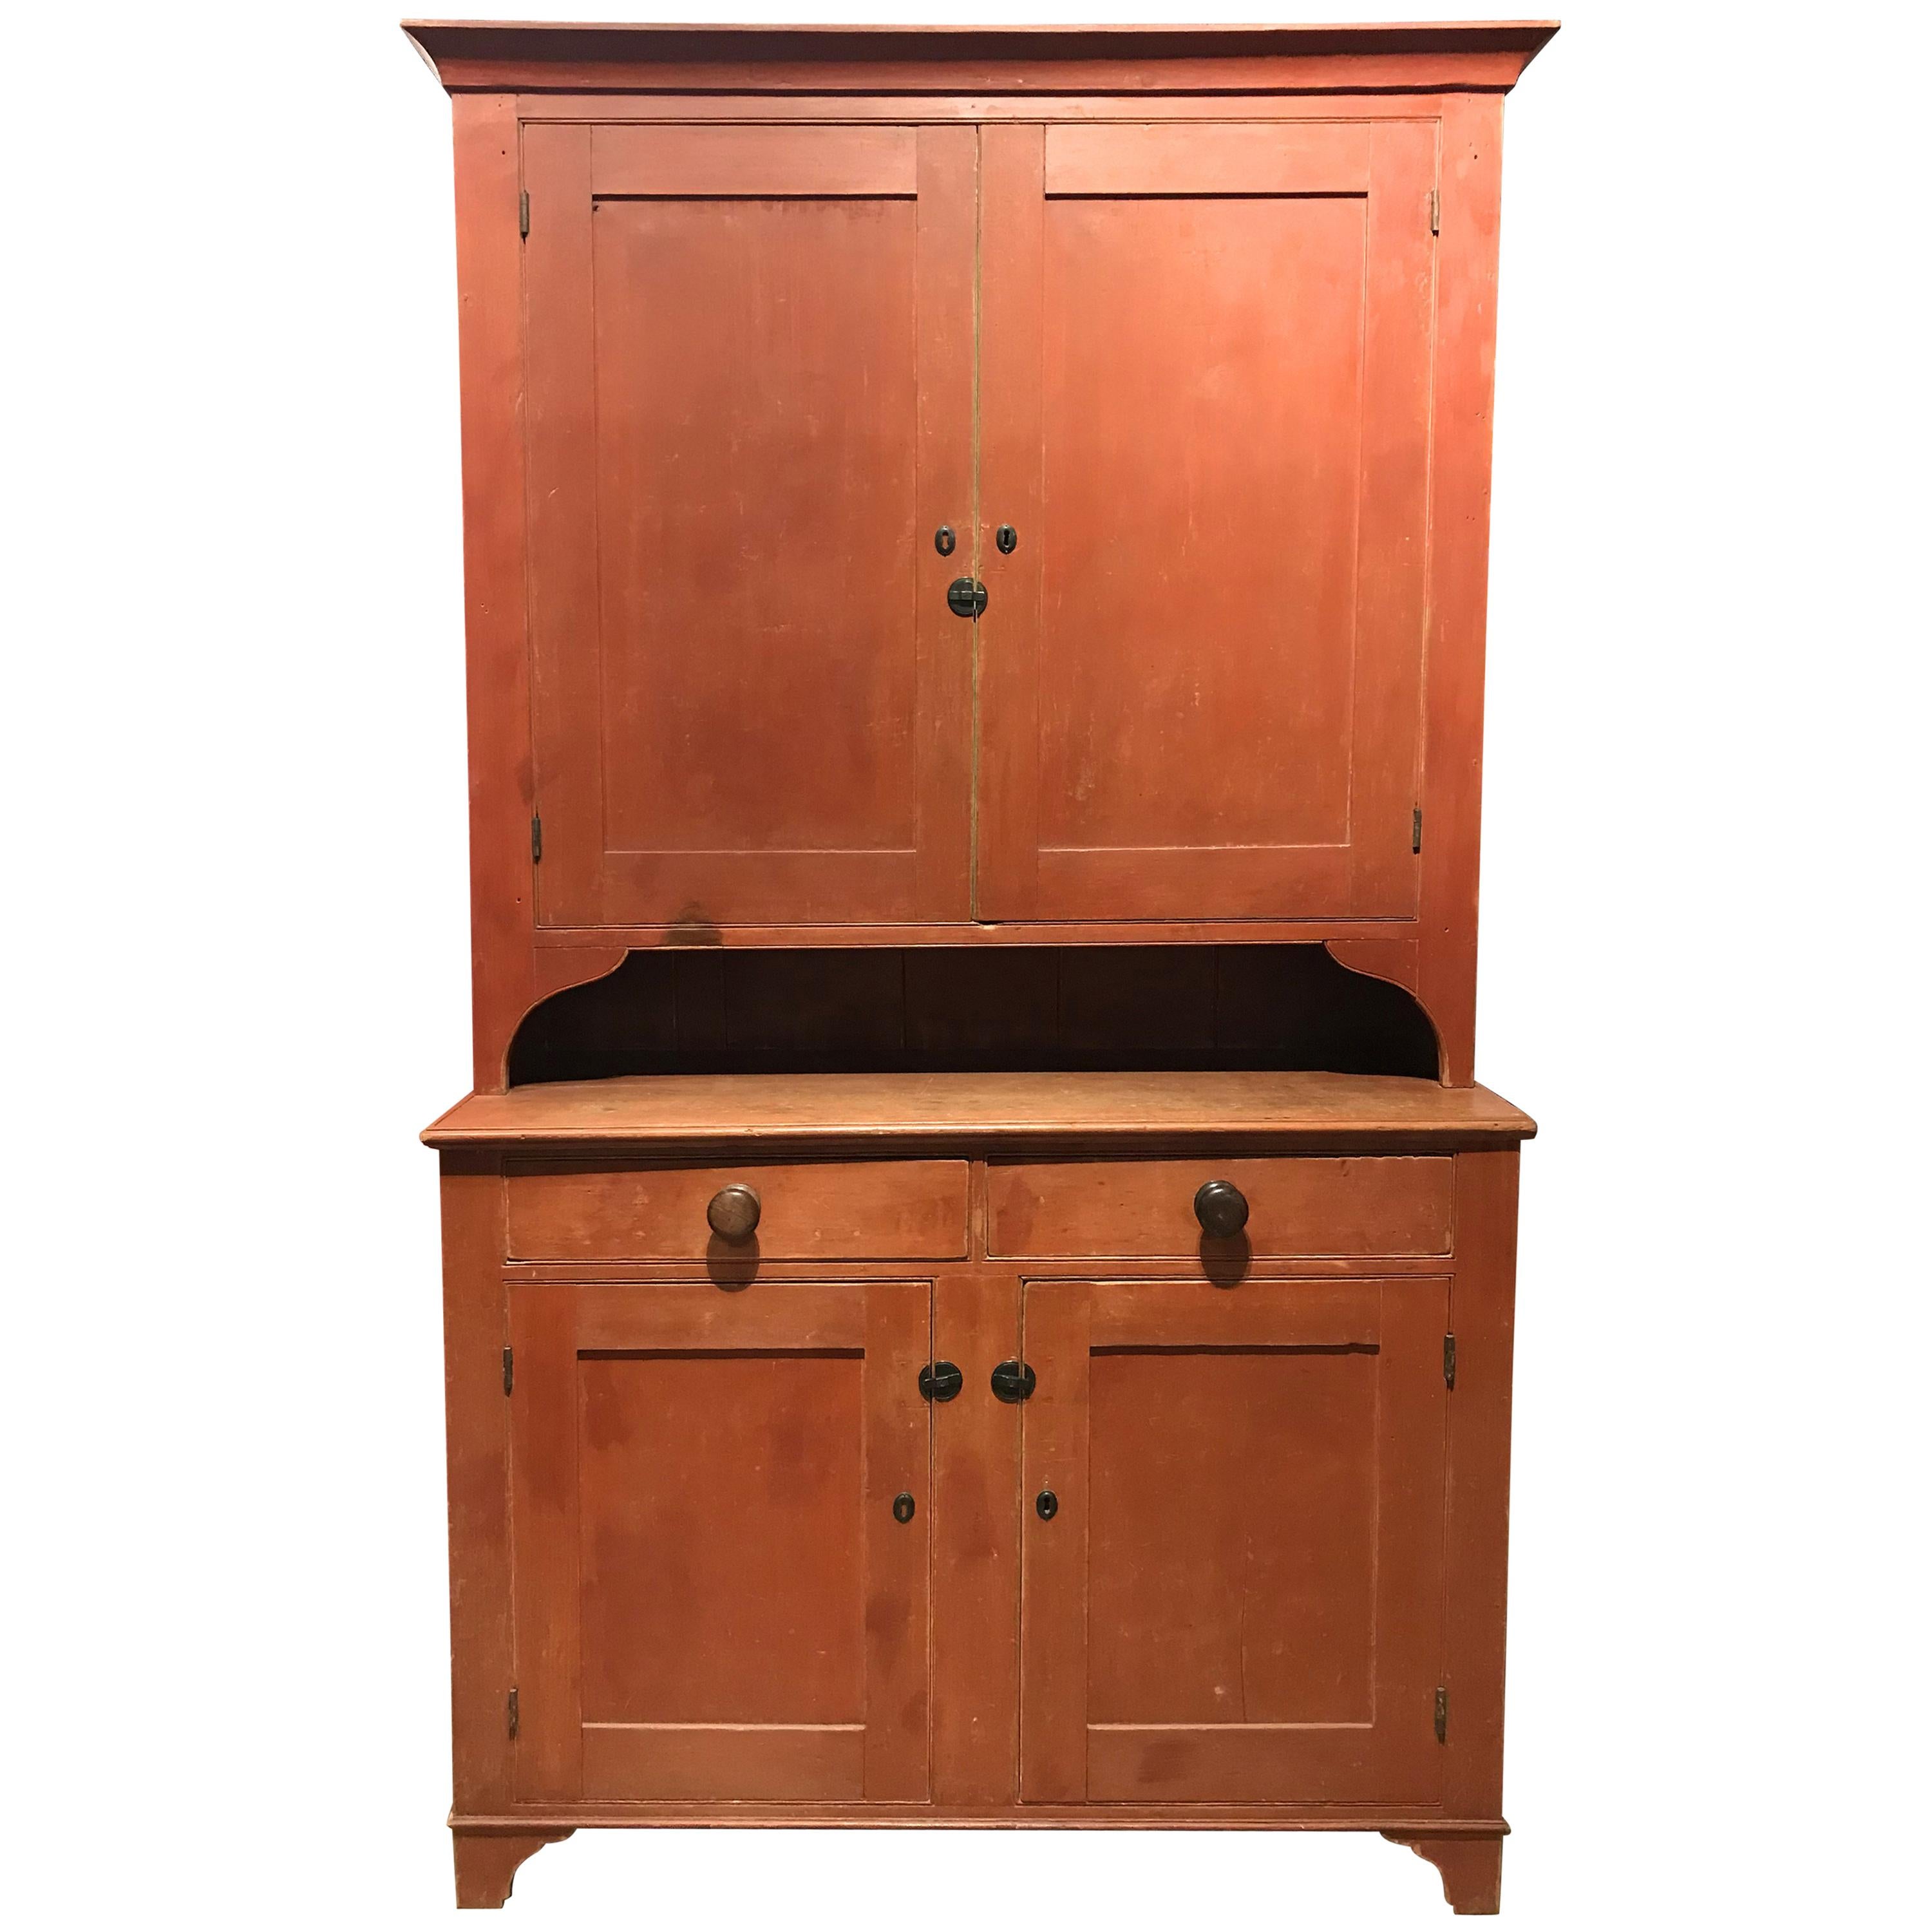 18th or 19th Century Pennsylvania Two Part Stepback Cupboard in Old Red Paint